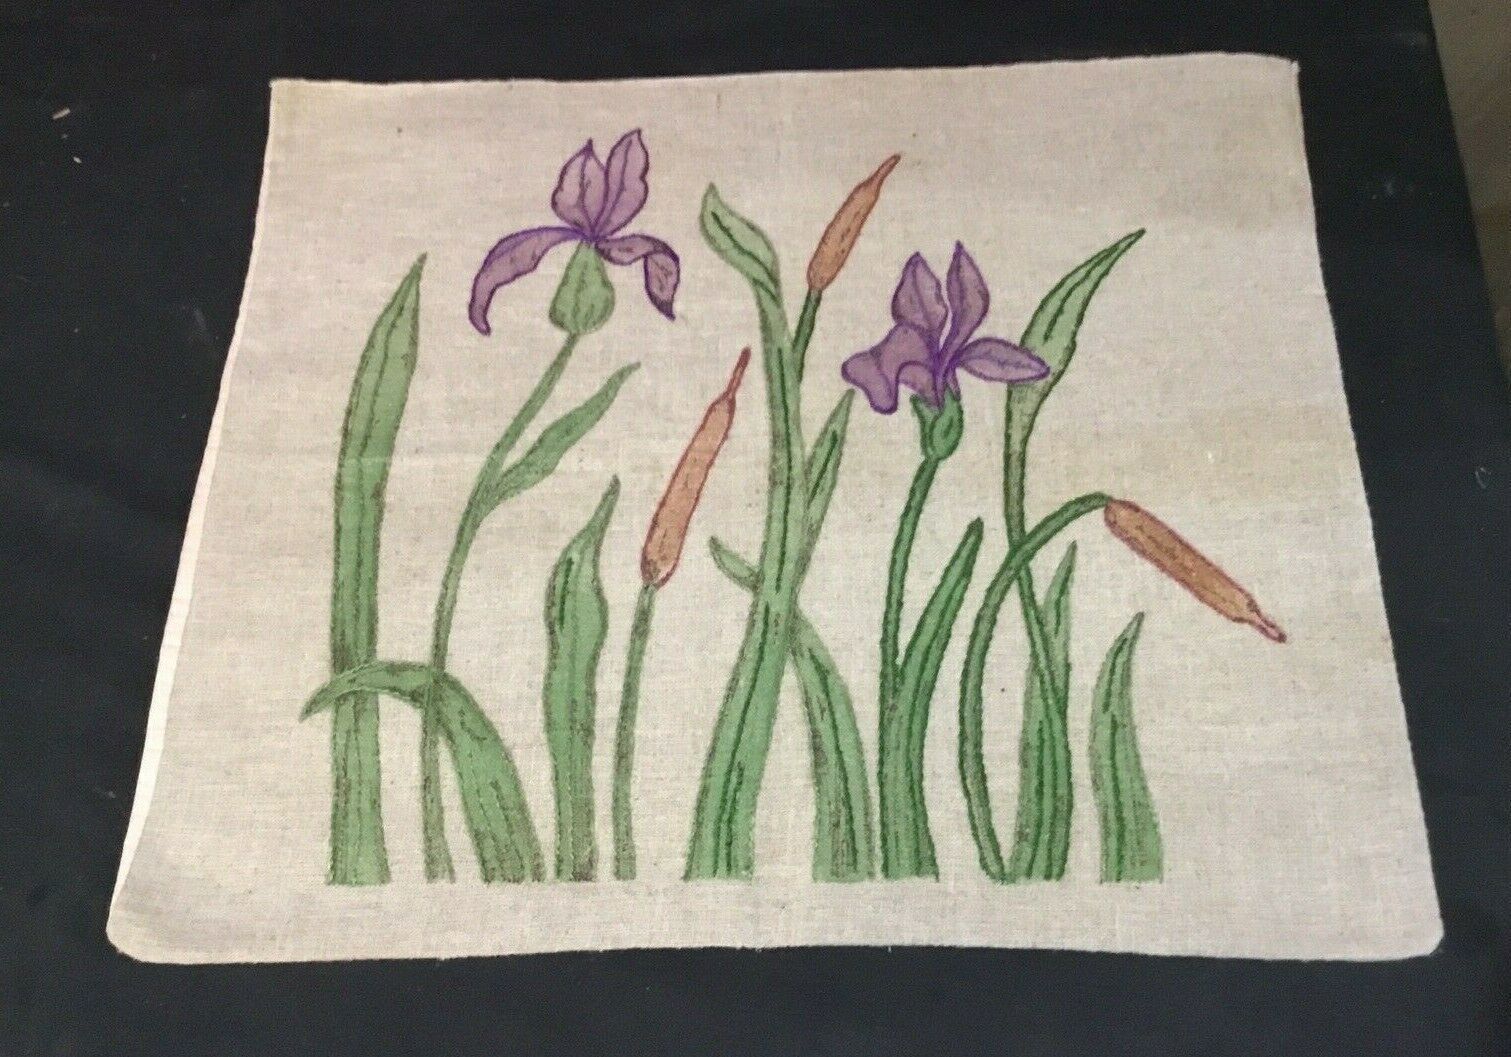 VINTAGE ARTS & CRAFTS EMBROIDERED LINEN PILLOWCASE WITH CATTAILS & IRIS